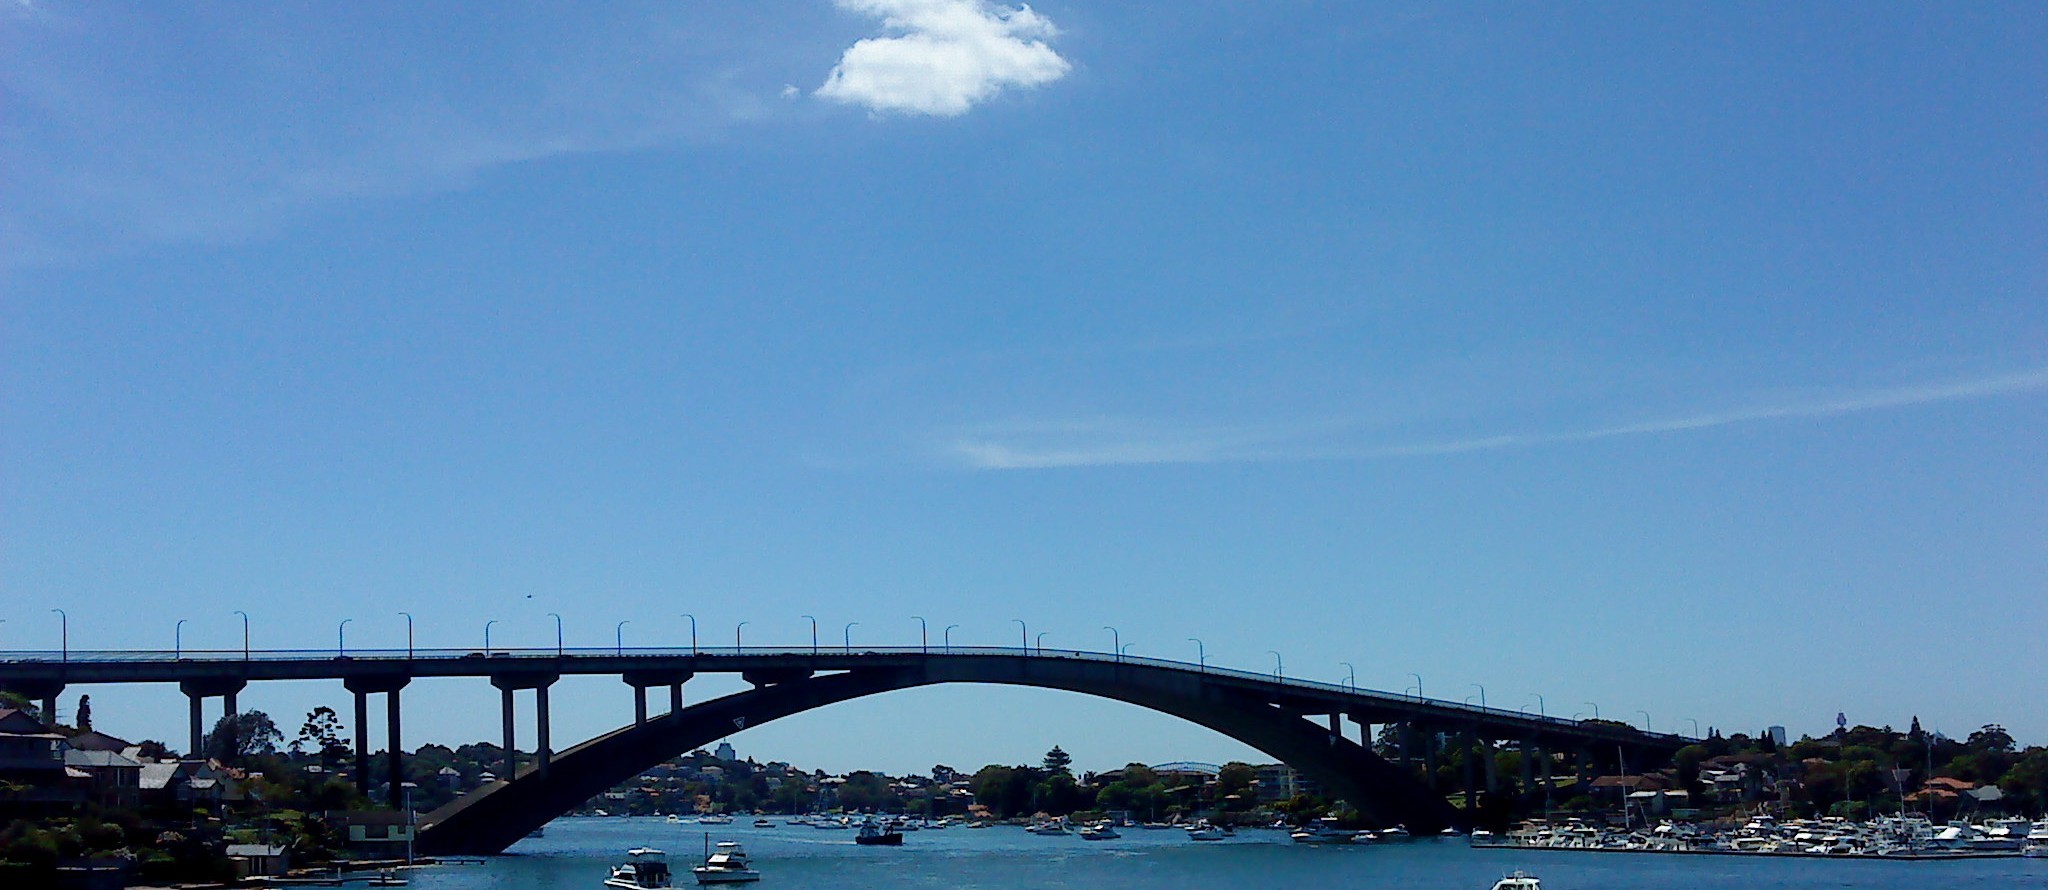 "Gladesville Bridge" by phonetography101@flickr, used under CC BY / Cropped from original